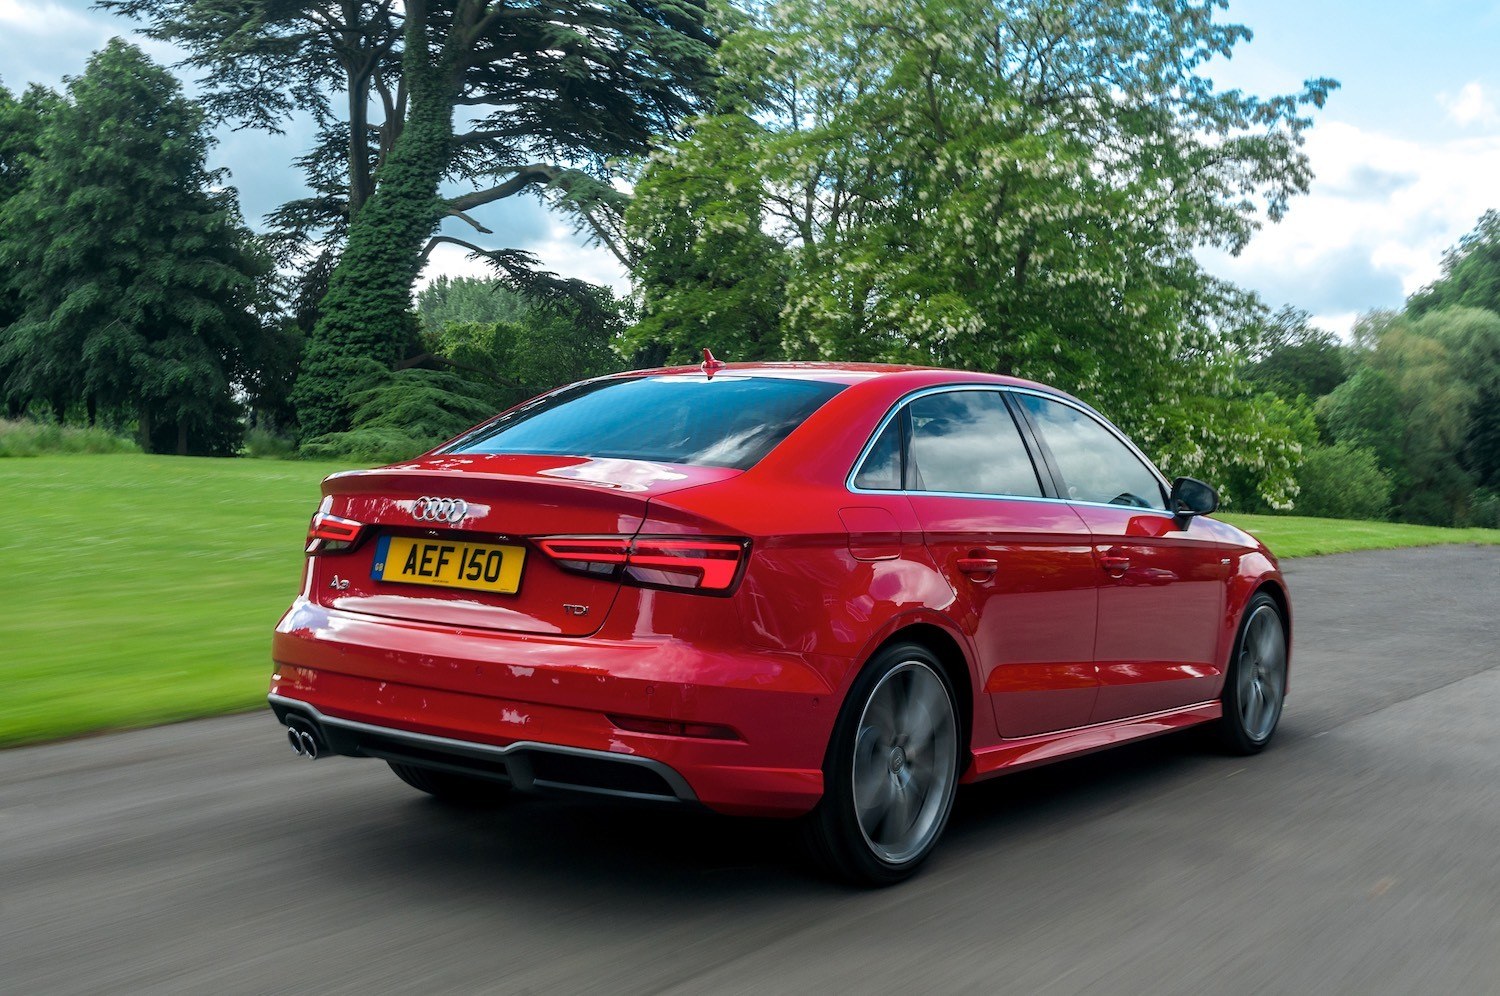 Tom Scanlan reviews the Audi A3 Saloon for Drive 1